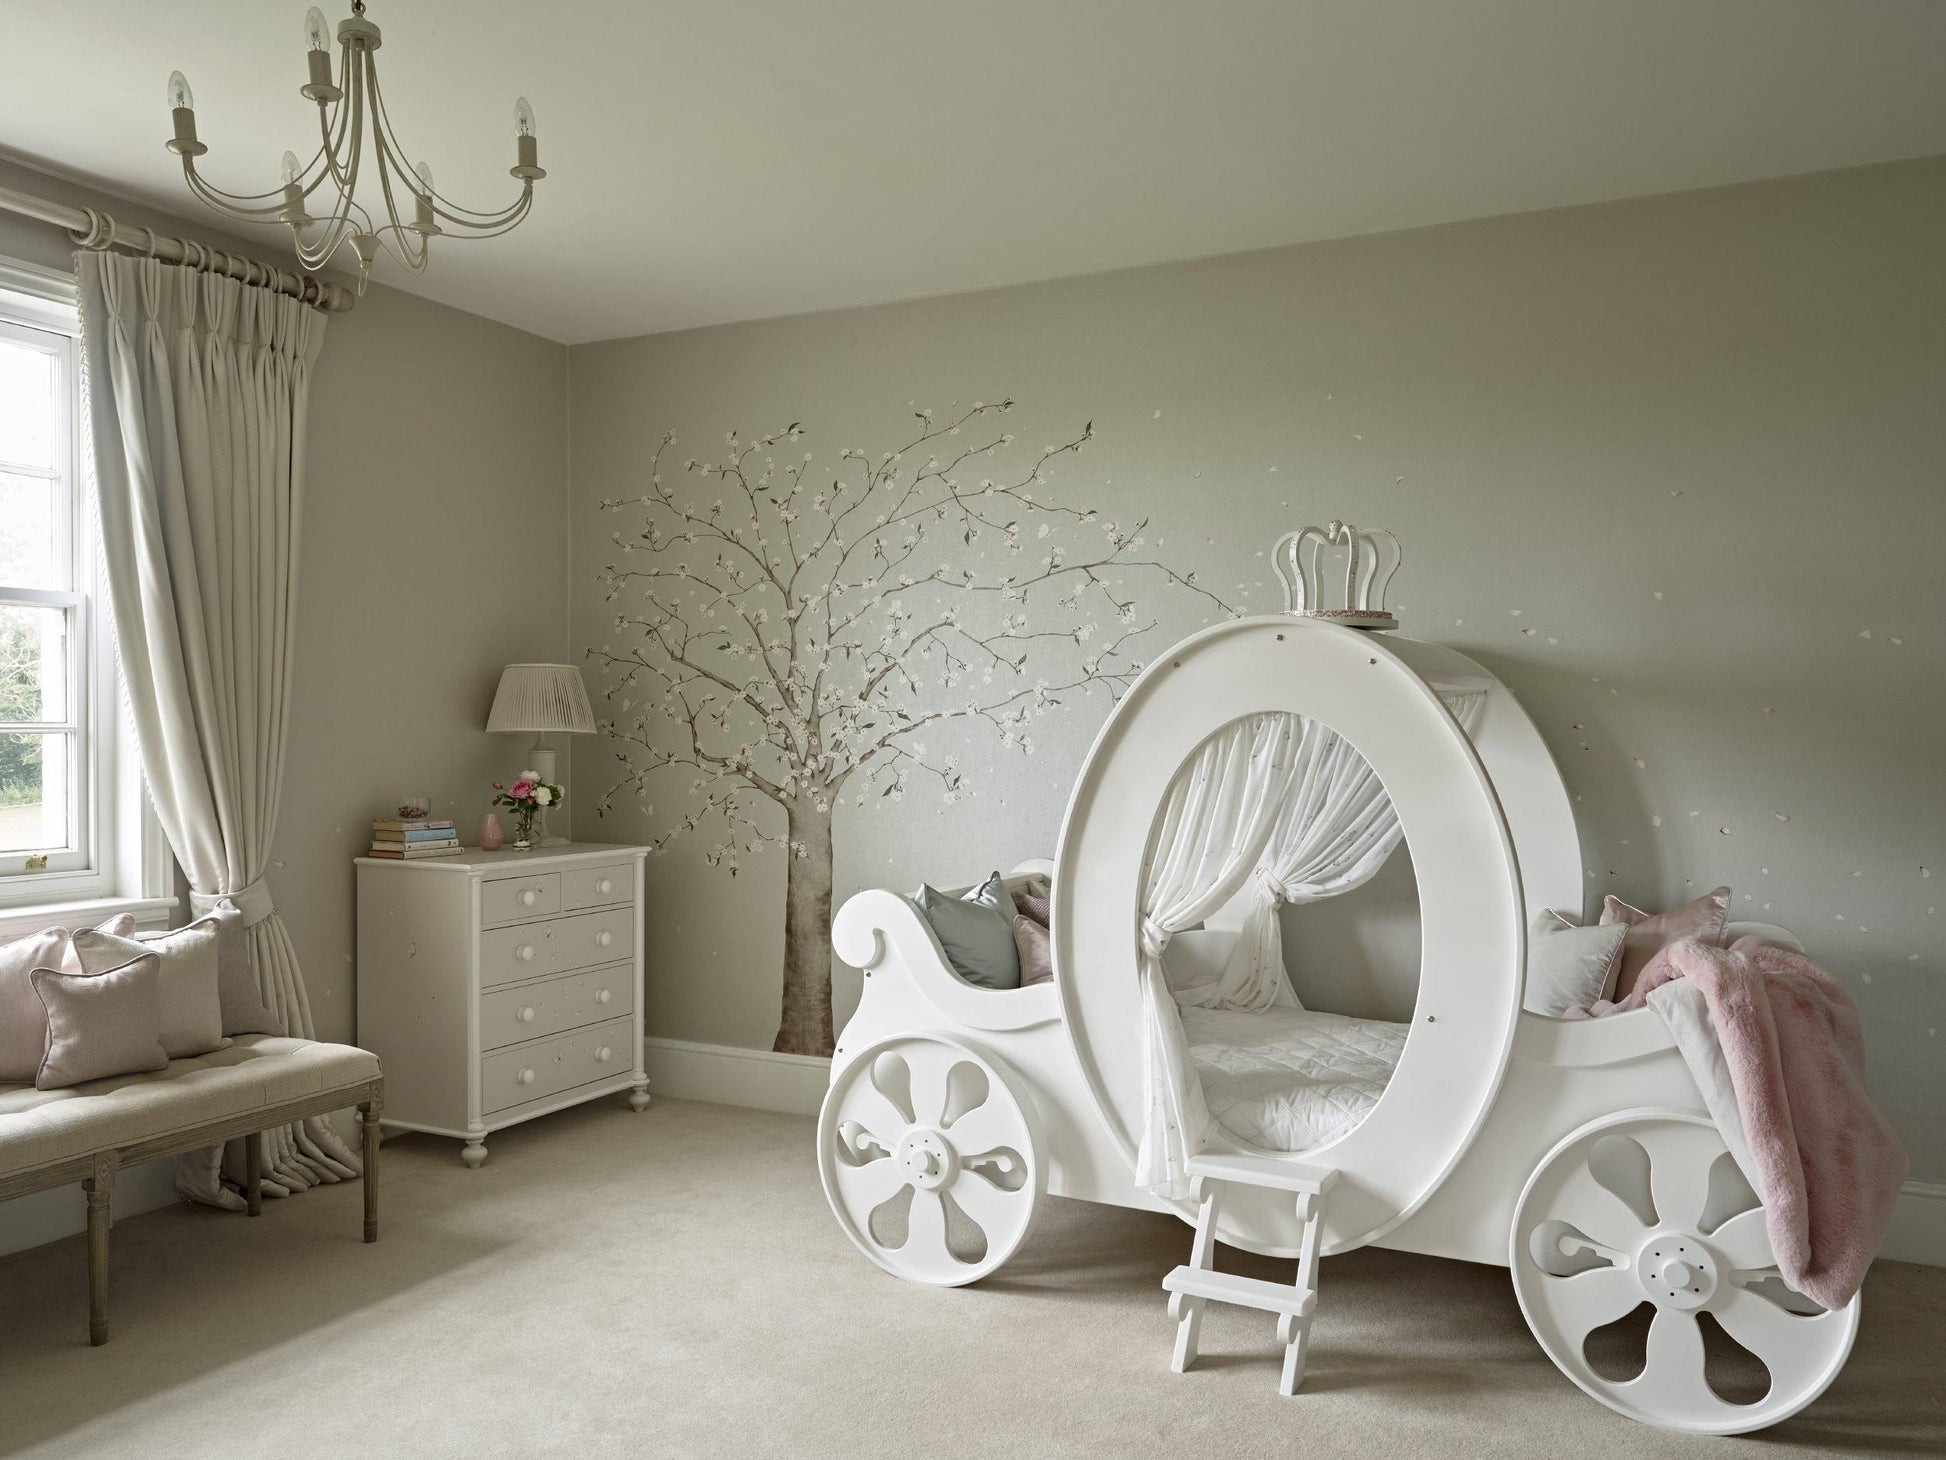 Princess Carriage Bed - Princess carriage bed | White wooden carriage bed | Dragons of Walton Street